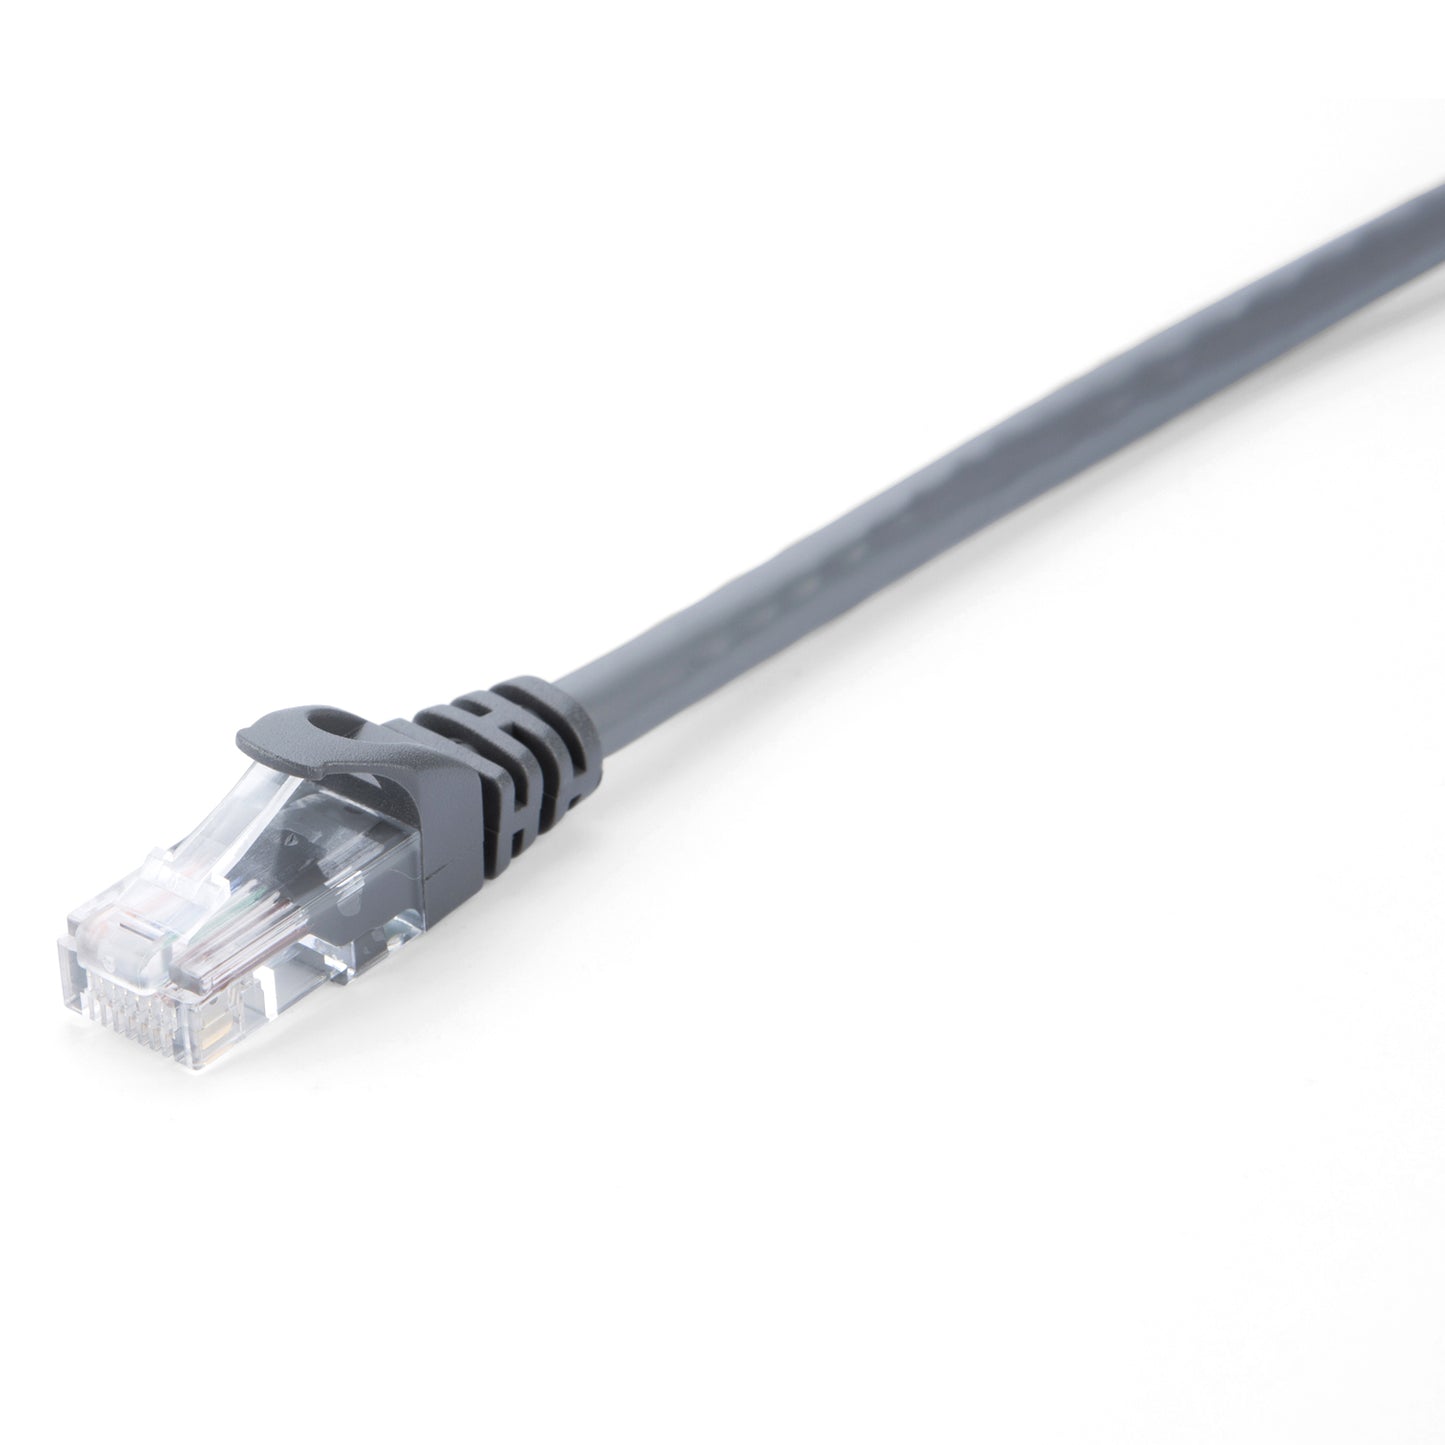 V7 Grey Cat6 Unshielded (UTP) Cable RJ45 Male to RJ45 Male 3m 10ft